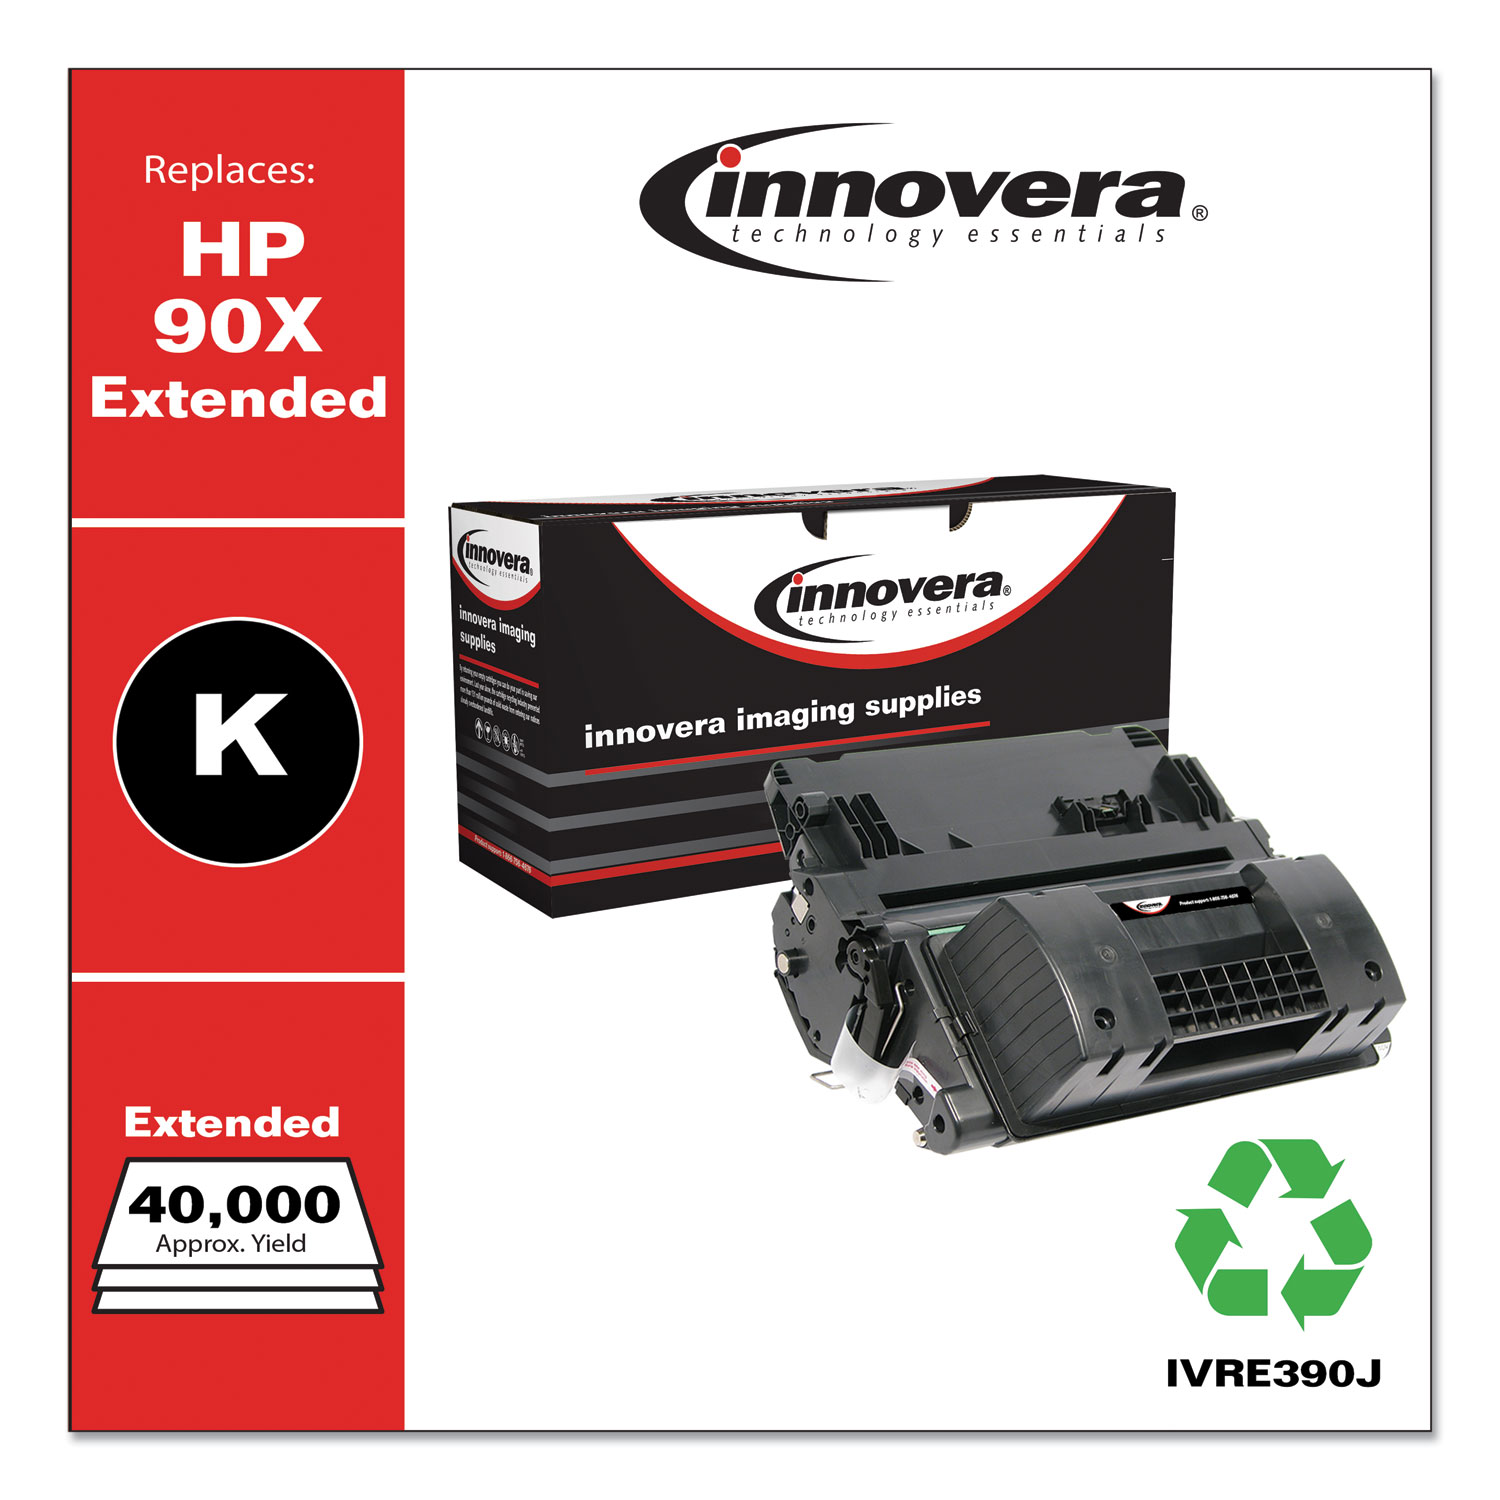  Innovera IVRE390J Remanufactured Black Extended-Yield Toner, Replacement for HP 90X (CE390XJ), 40,000 Page-Yield (IVRE390J) 